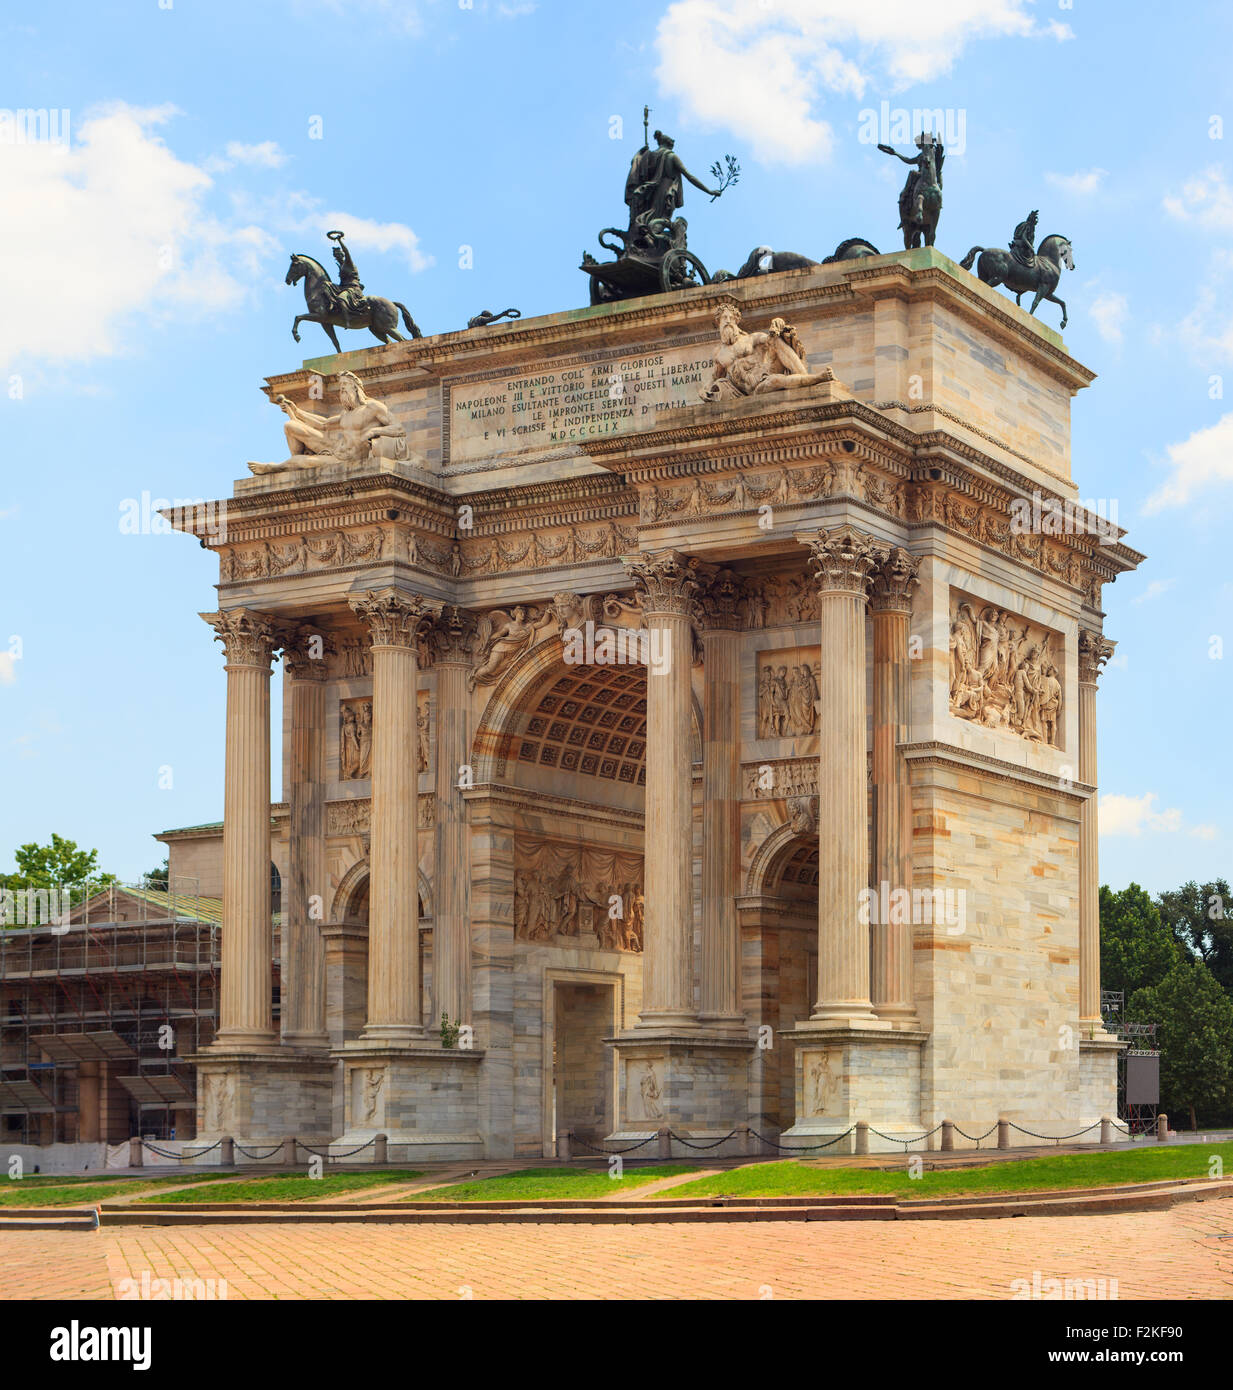 View of the Arco della Pace, triumphal arch in Milan, taly Stock Photo